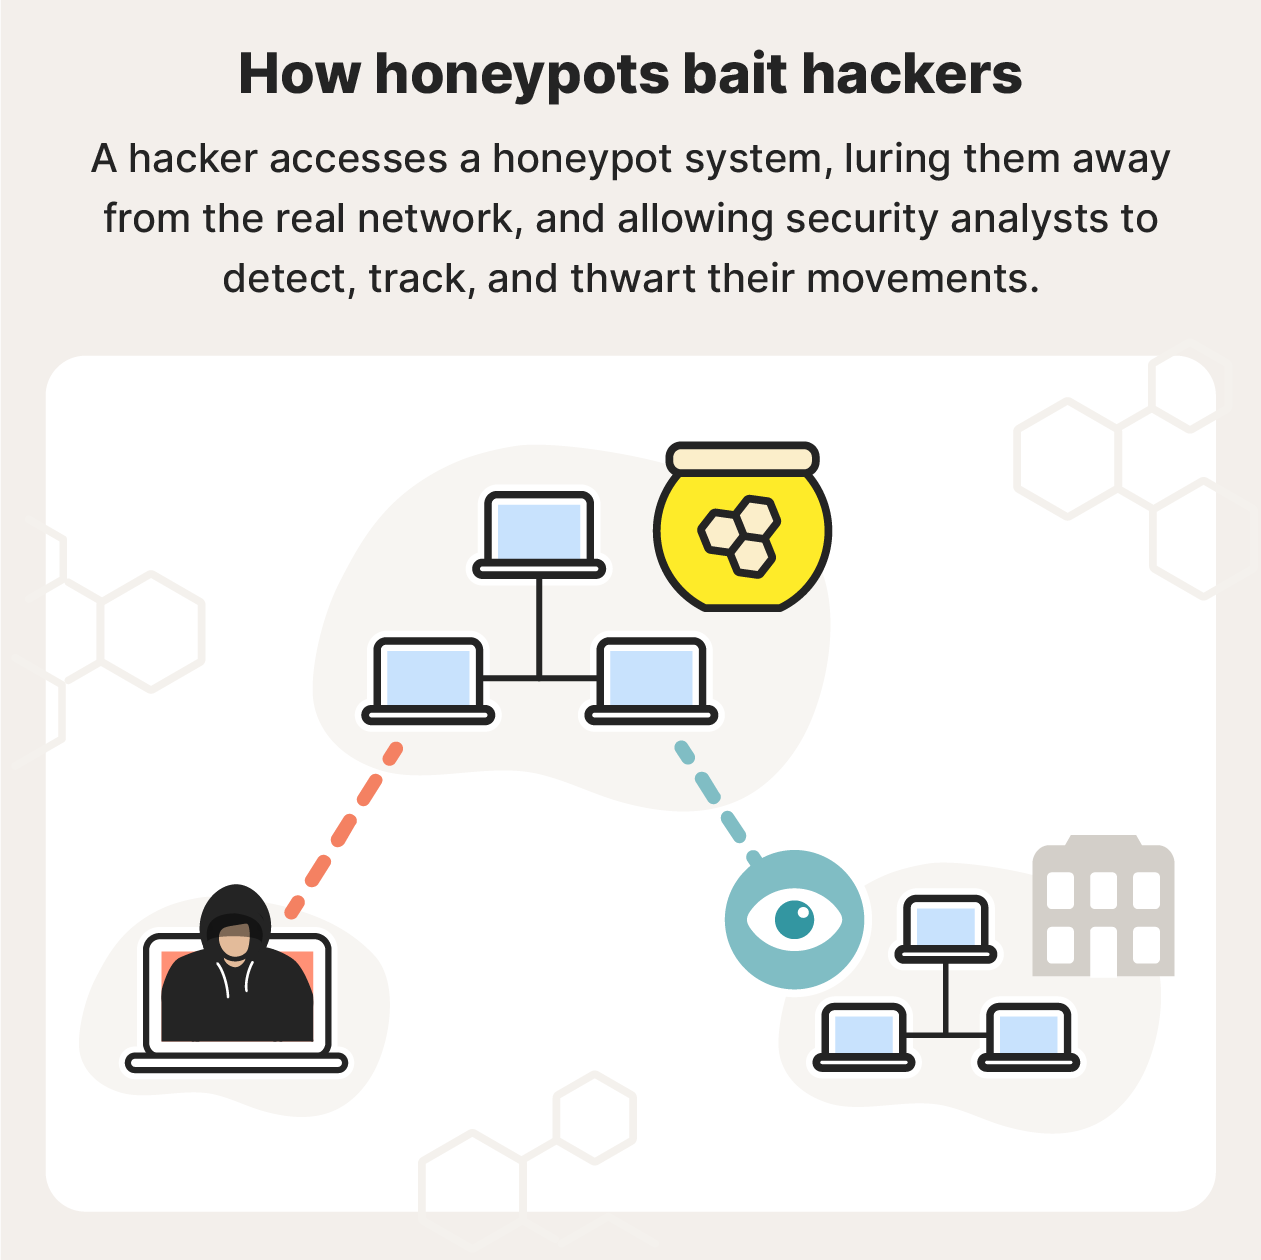 A honeypot trap lures hackers to a fake system, allowing security analysts to detect, track, and thwart their movements. 